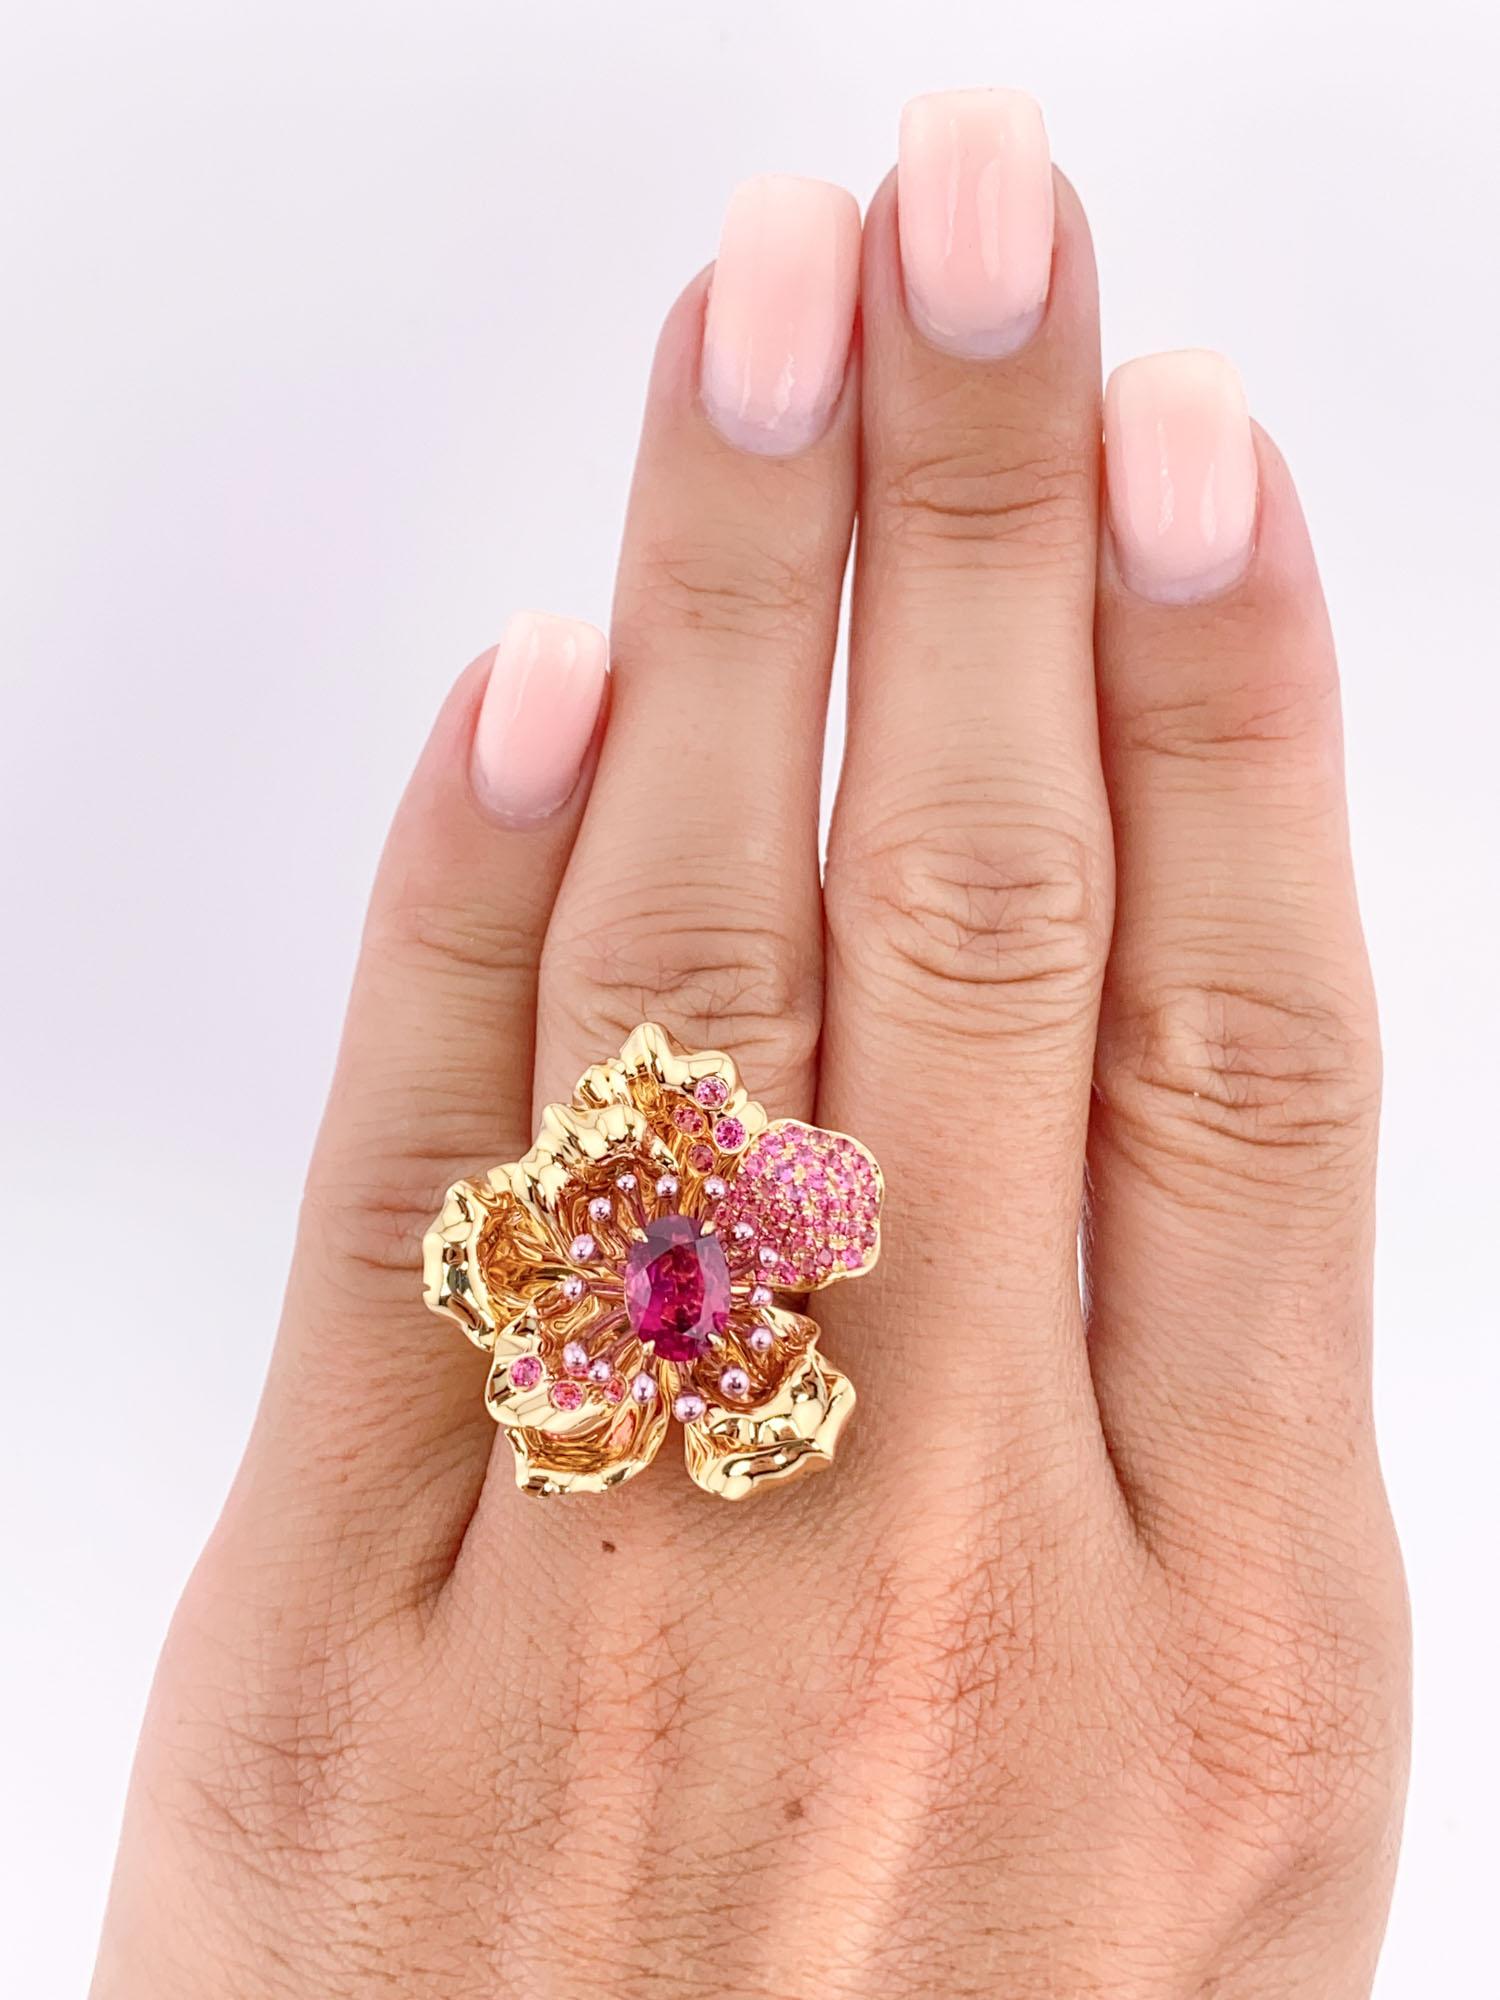 Art Jewelry Rubellite Tourmaline Center Flower Ring / Pendant 18K Gold R6641 In New Condition For Sale In Osprey, FL